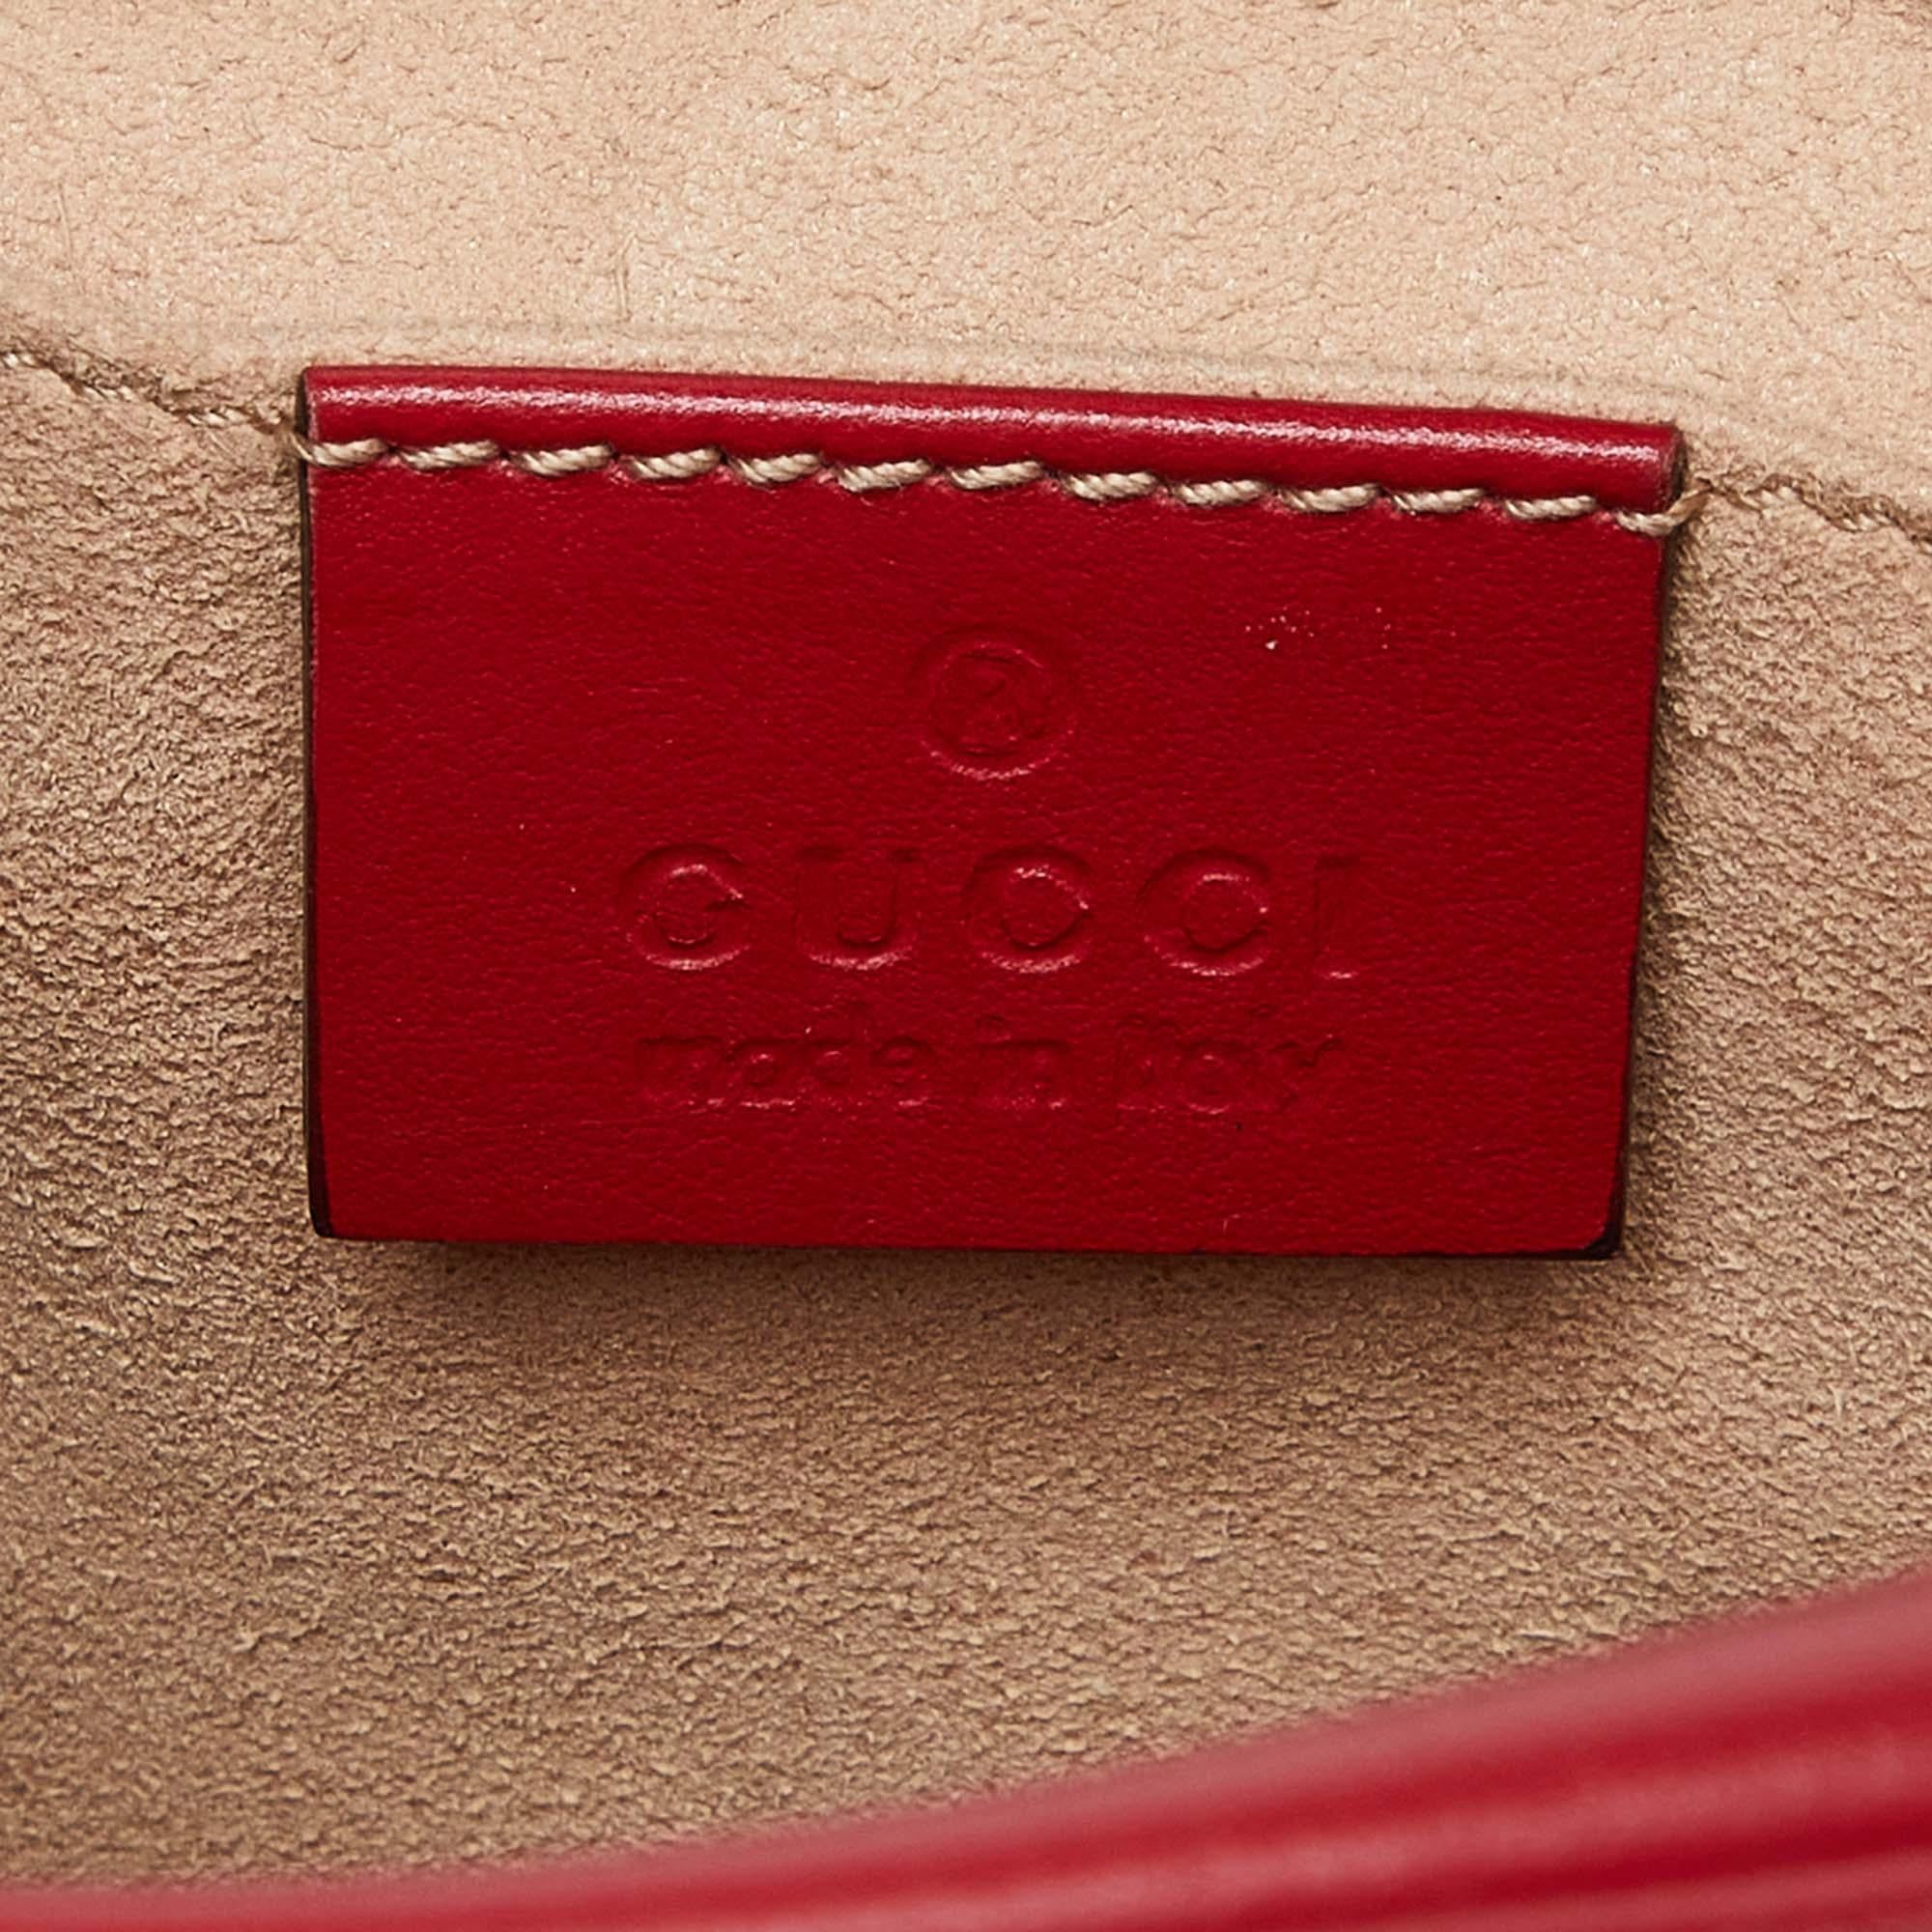 Gucci Red Matelassé Leather Small GG Marmont Shoulder Bag For Sale 5